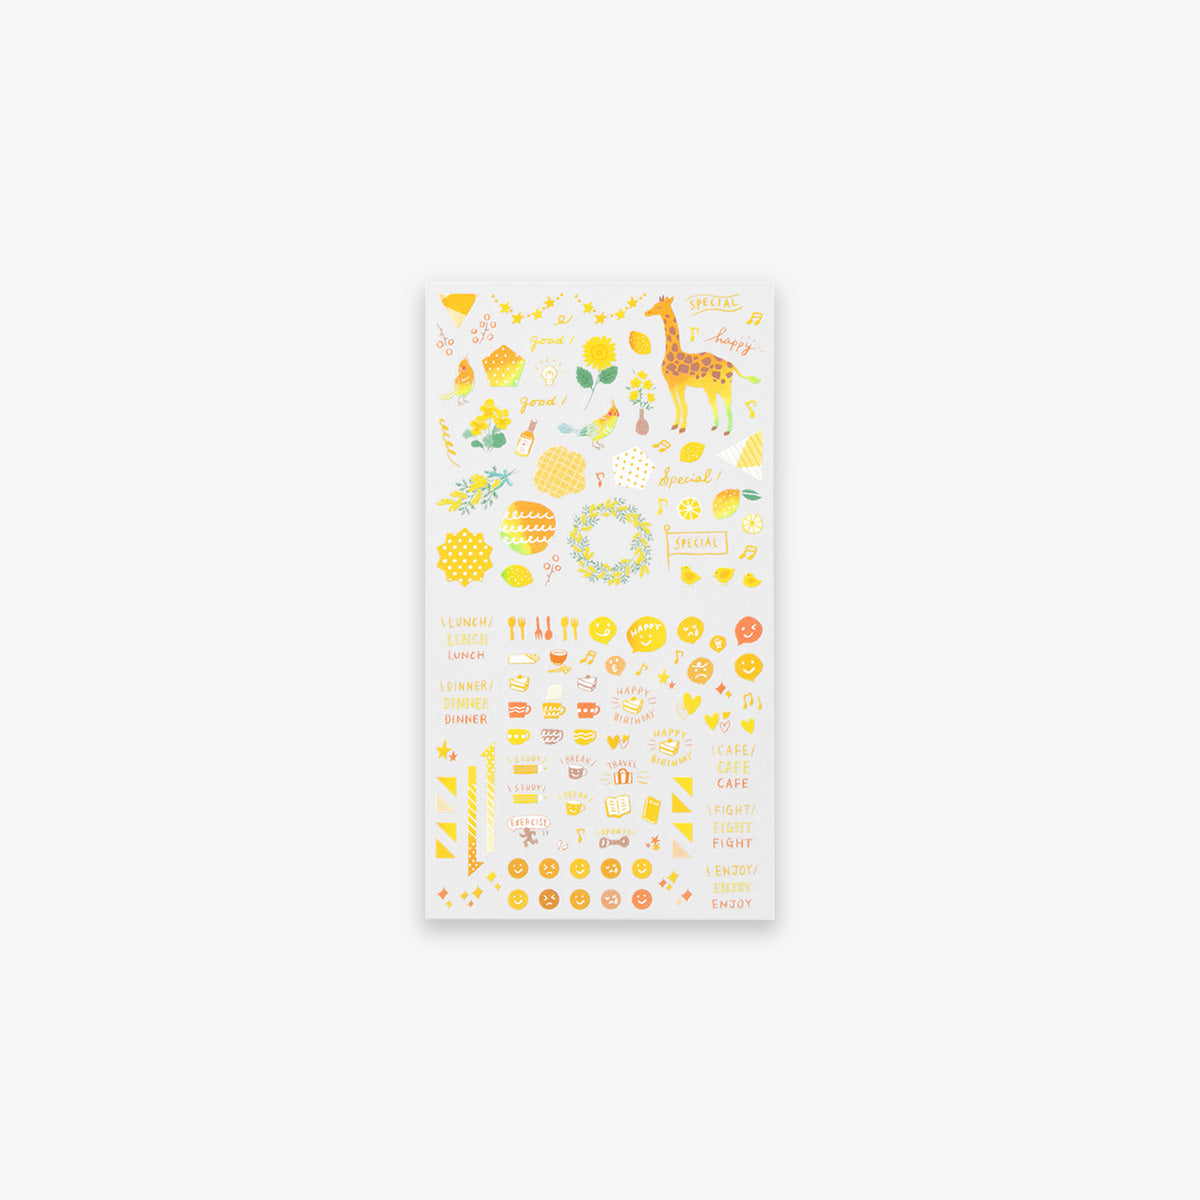 products/YellowColor_Stickers_Packshot_02.jpg